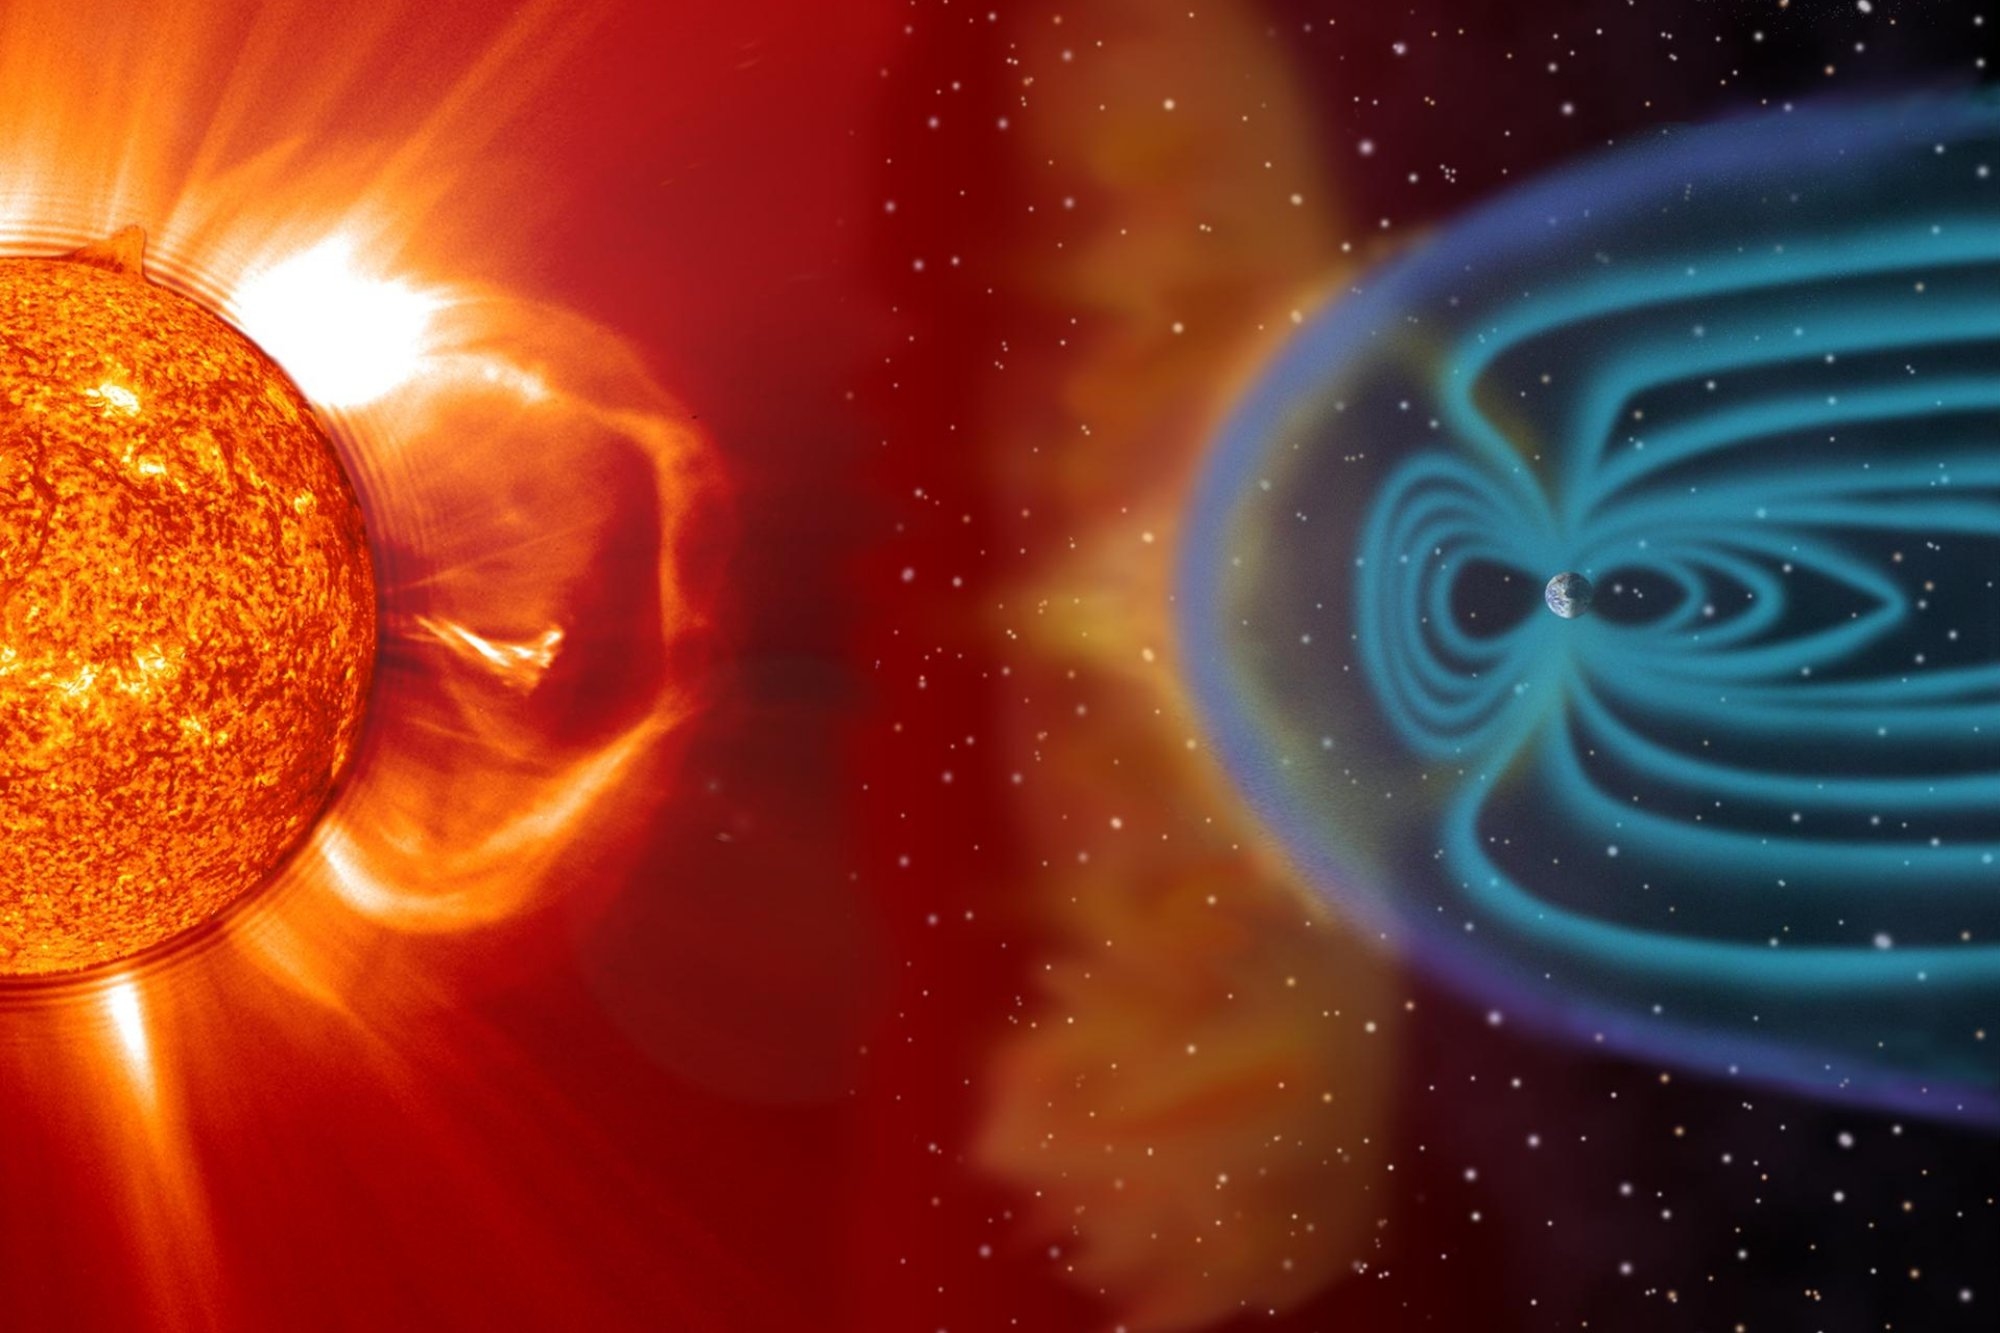 MIT-led team to develop software to help forecast space storms